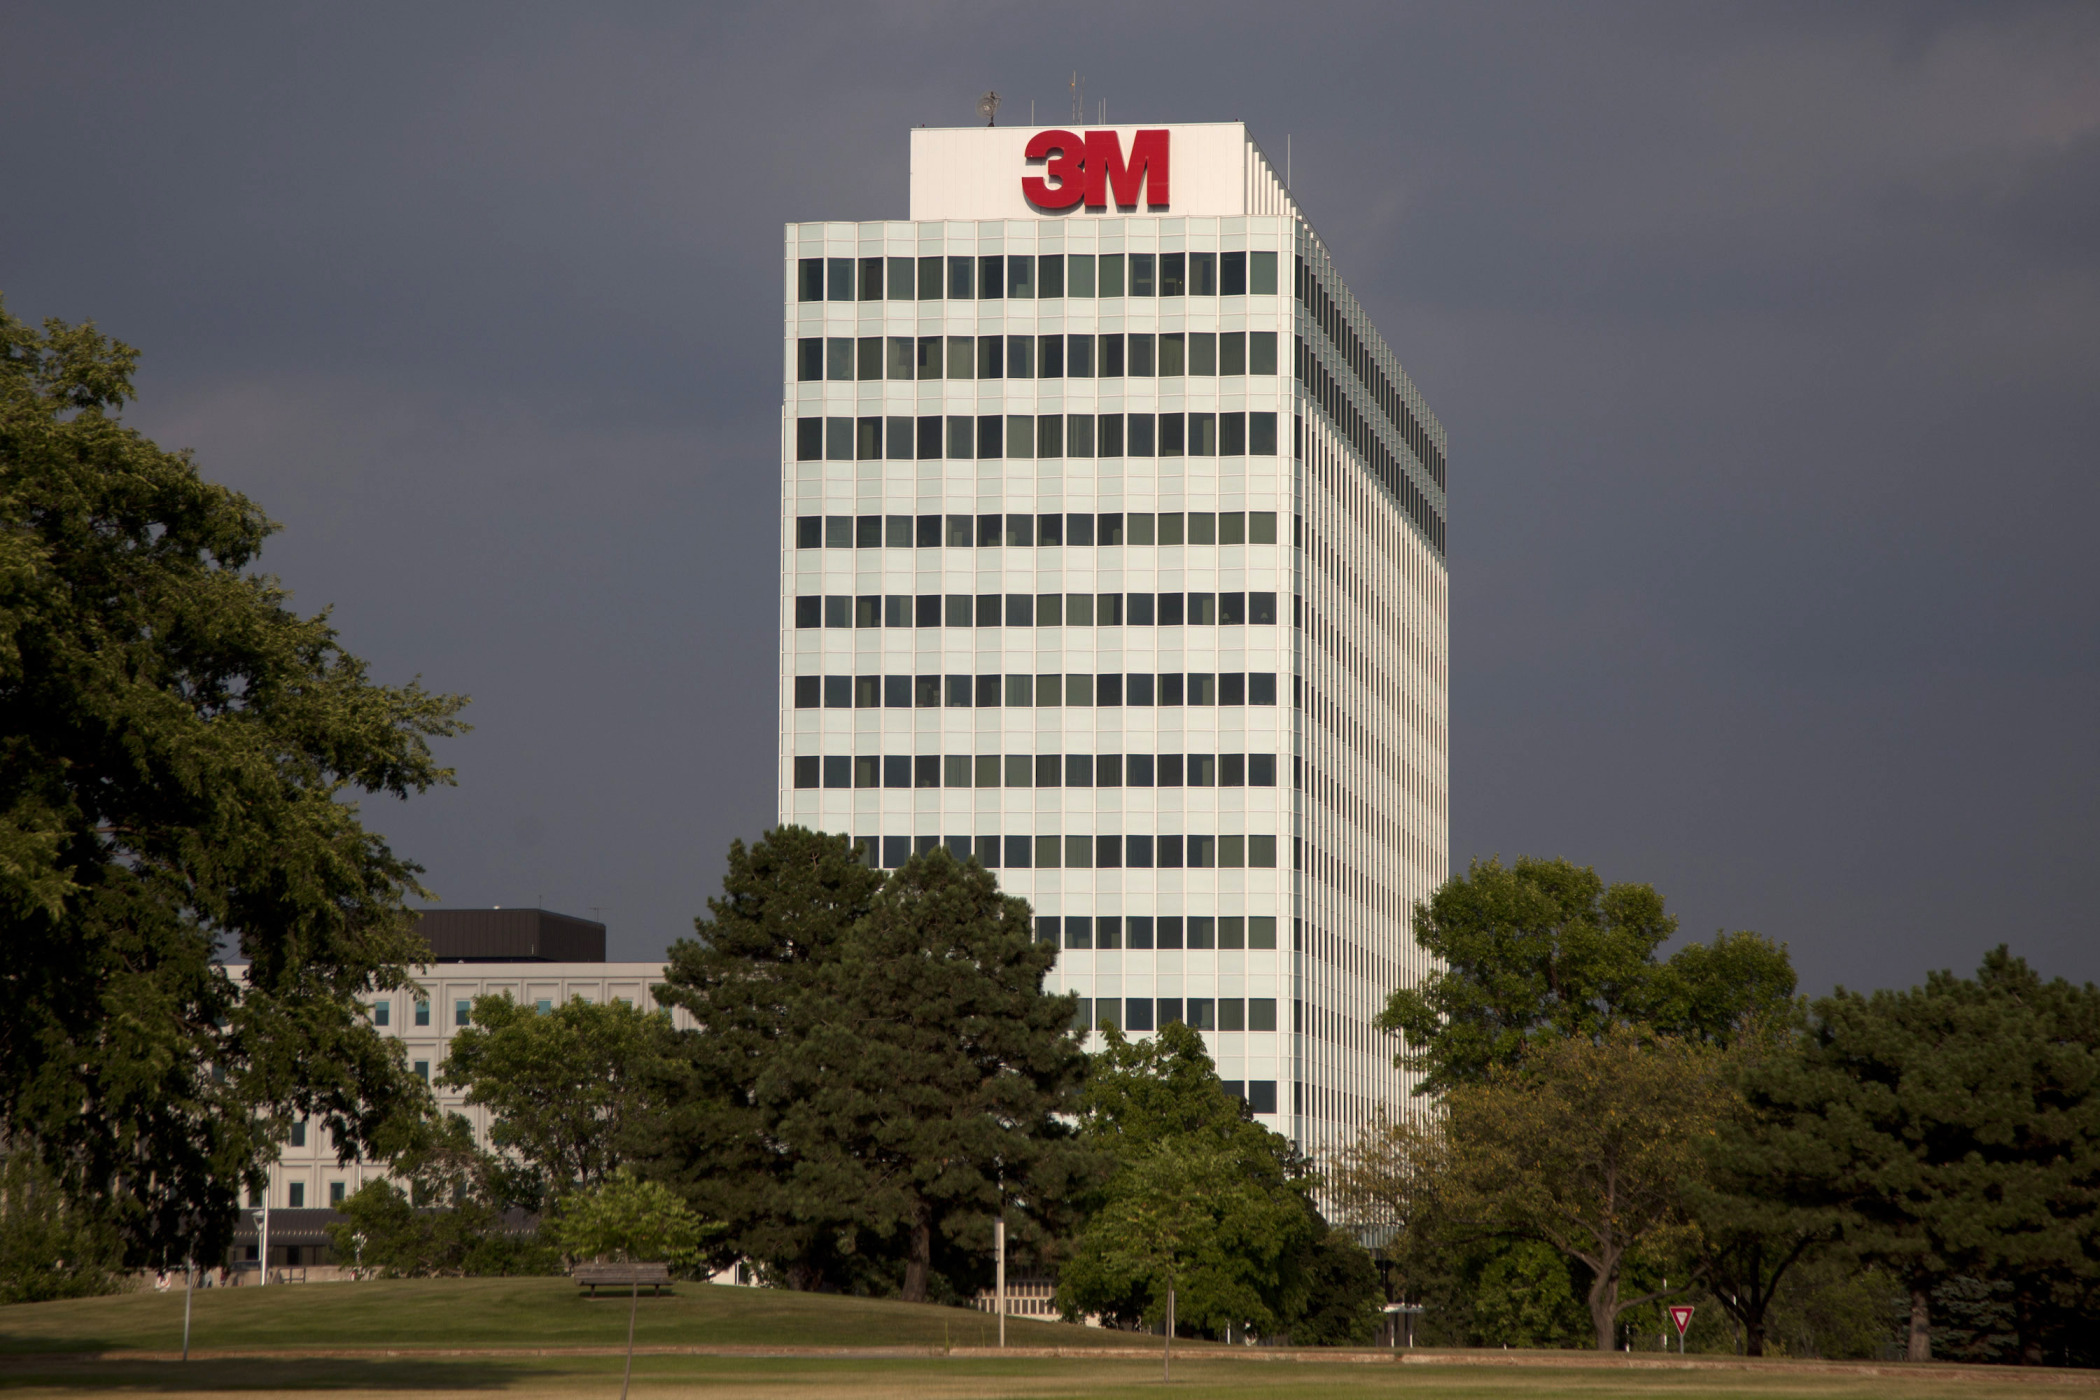 3M Plans Job Layoffs as Part of Cost Cutting After Underperformance